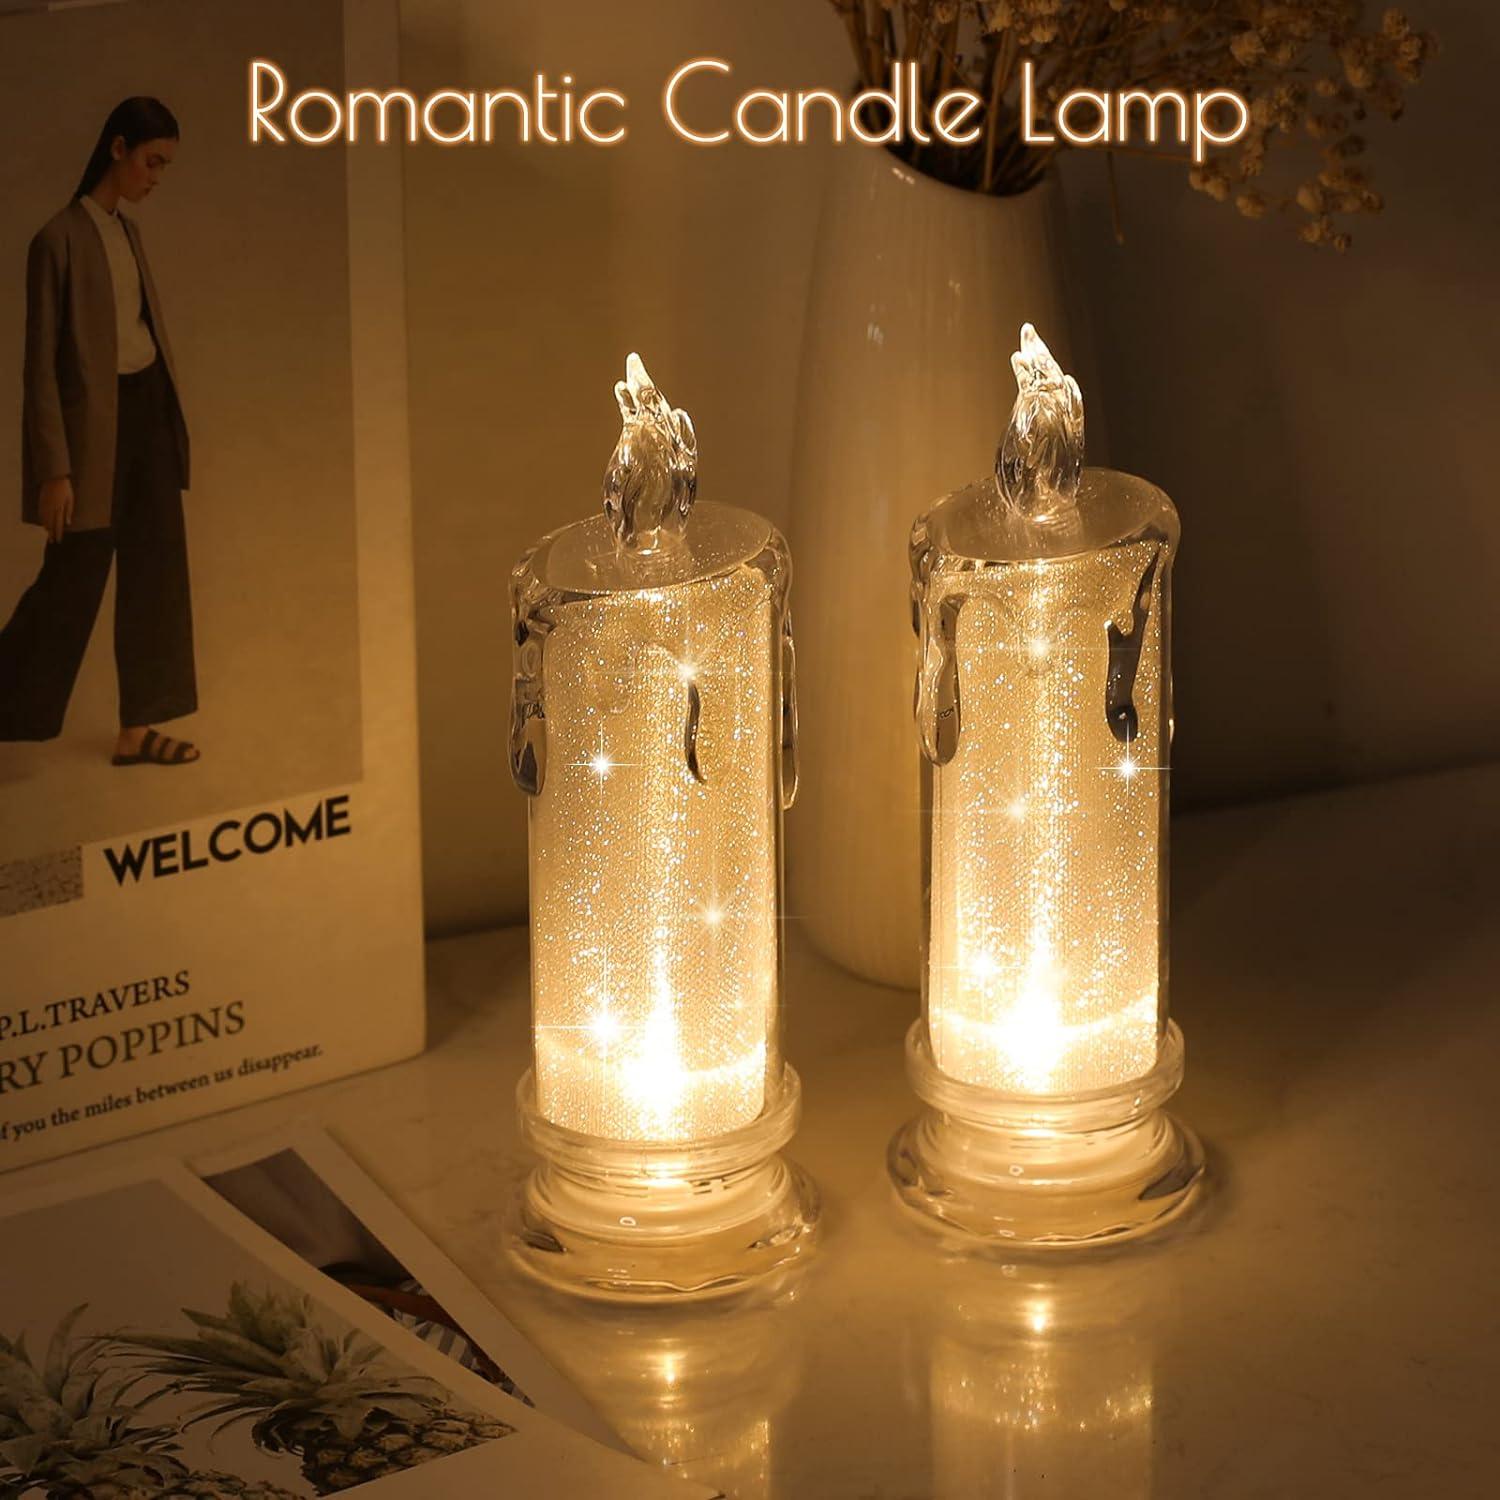 6PCS White LED flameless Candles,LED Clearance Pillar Candles for Valentine's Day Wedding Birthday Decorations - Decotree.co Online Shop